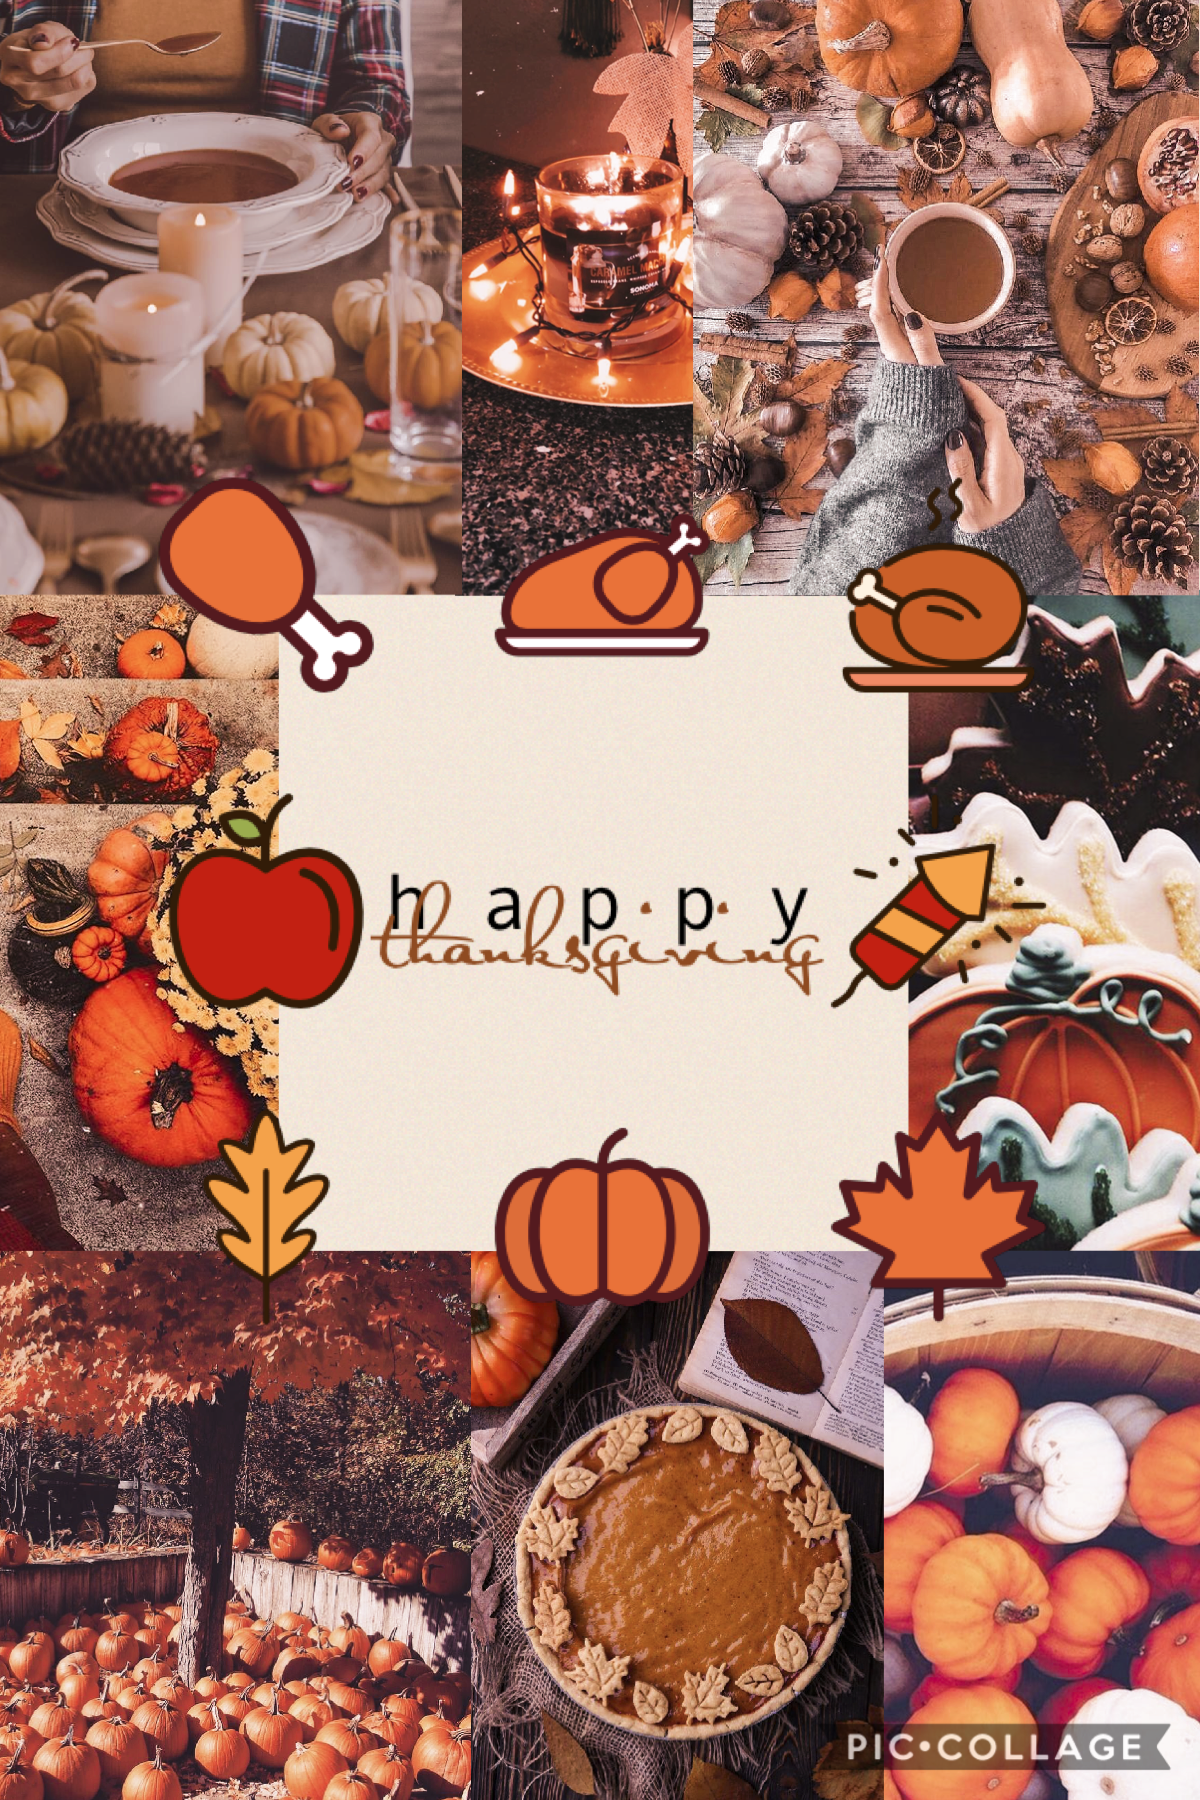 tap the 🦃 
happy thanksgiving!
sorry i’ve been so inactive lately, there’s been a lot on my plate and i’m so stressed! y’all go eat some delicious food!!